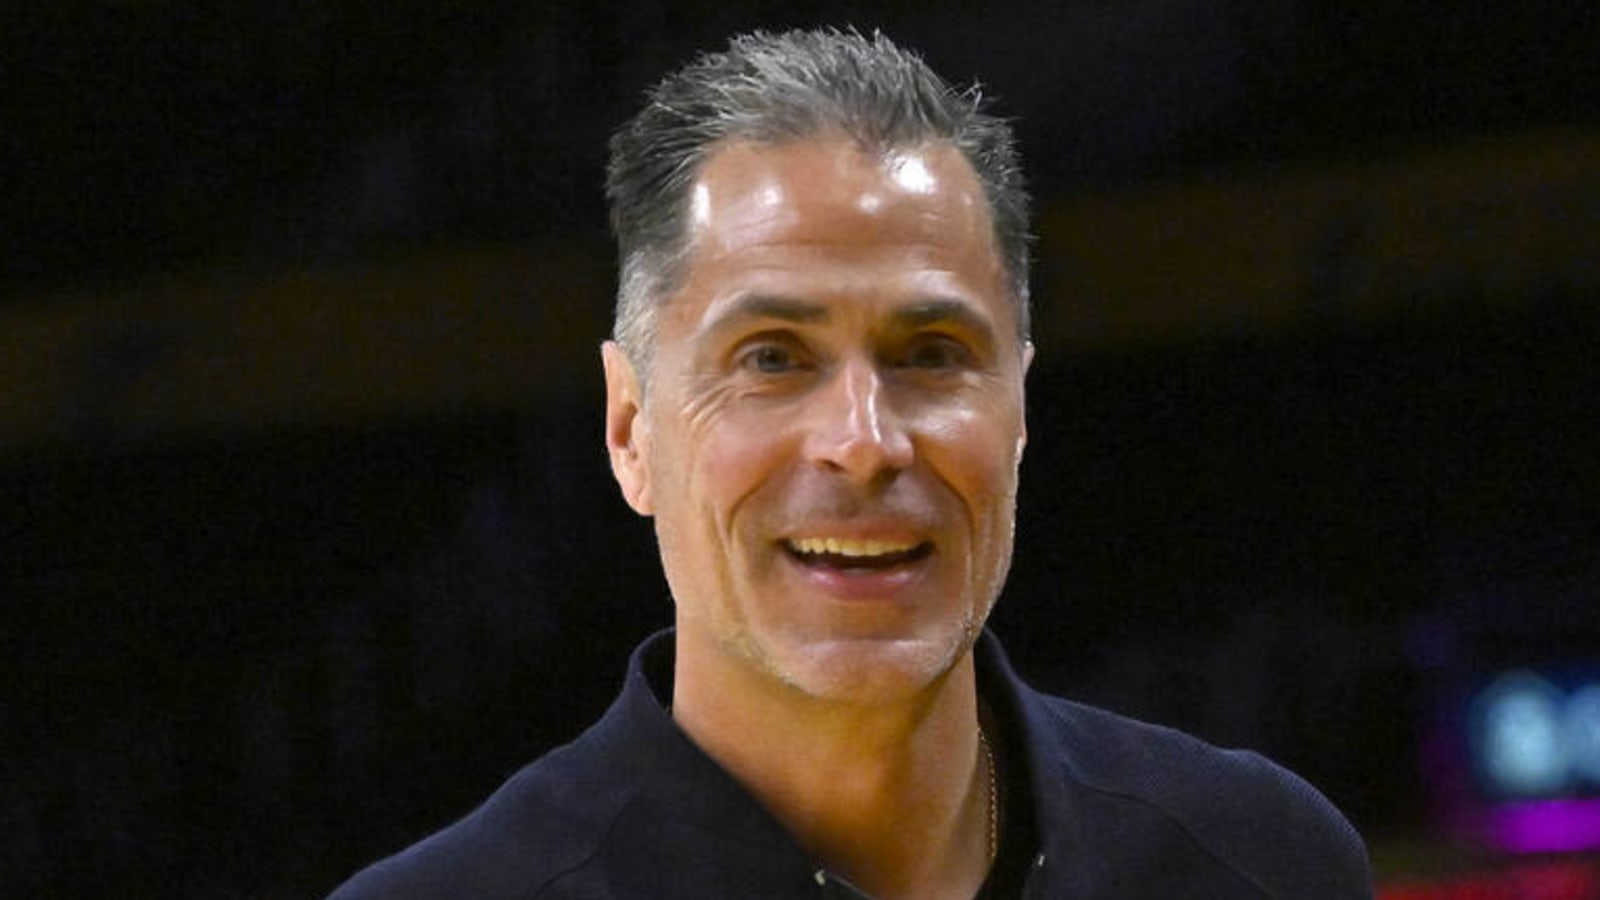 Los Angeles Lakers’ Taking Major Step in Search for New Head Coach ‘In the Coming Days’